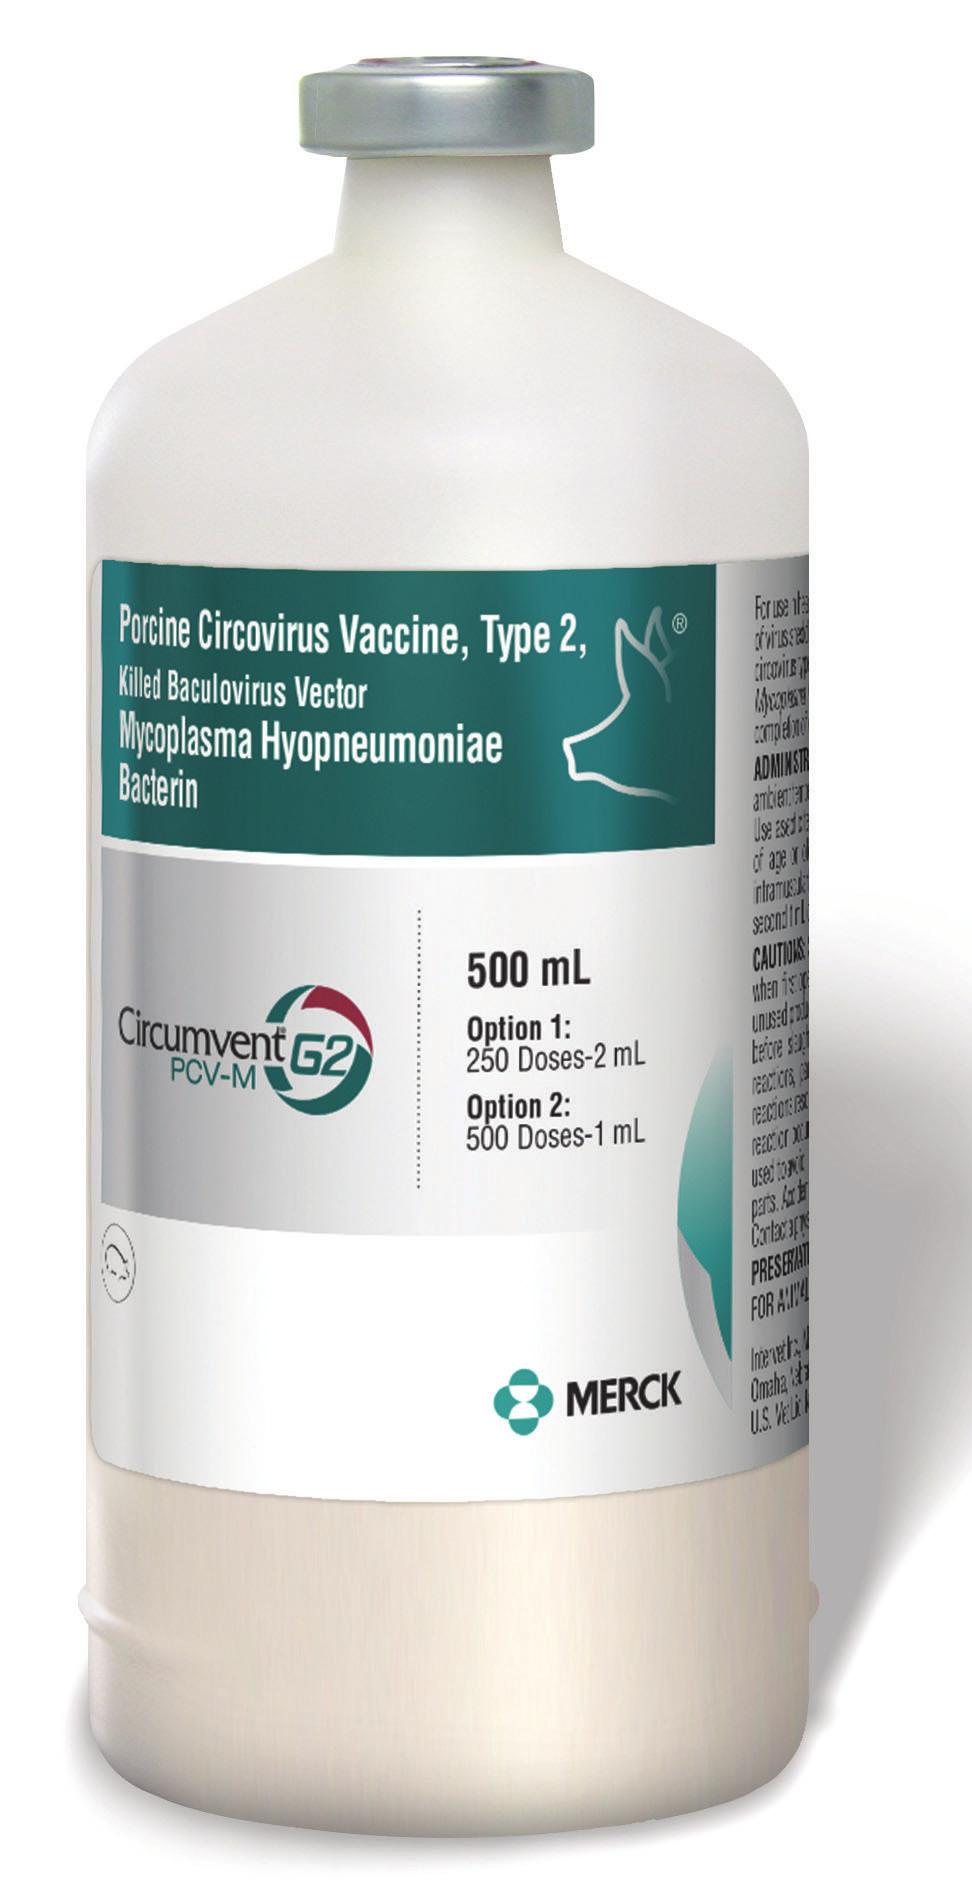 A new combo that fits your unique operation. A single-bottle solution. Circumvent PCV-M G2 is the reliable, 1-dose, ready-to-use combo vaccine for PCV2 and Mycoplasma hyopneumoniae.